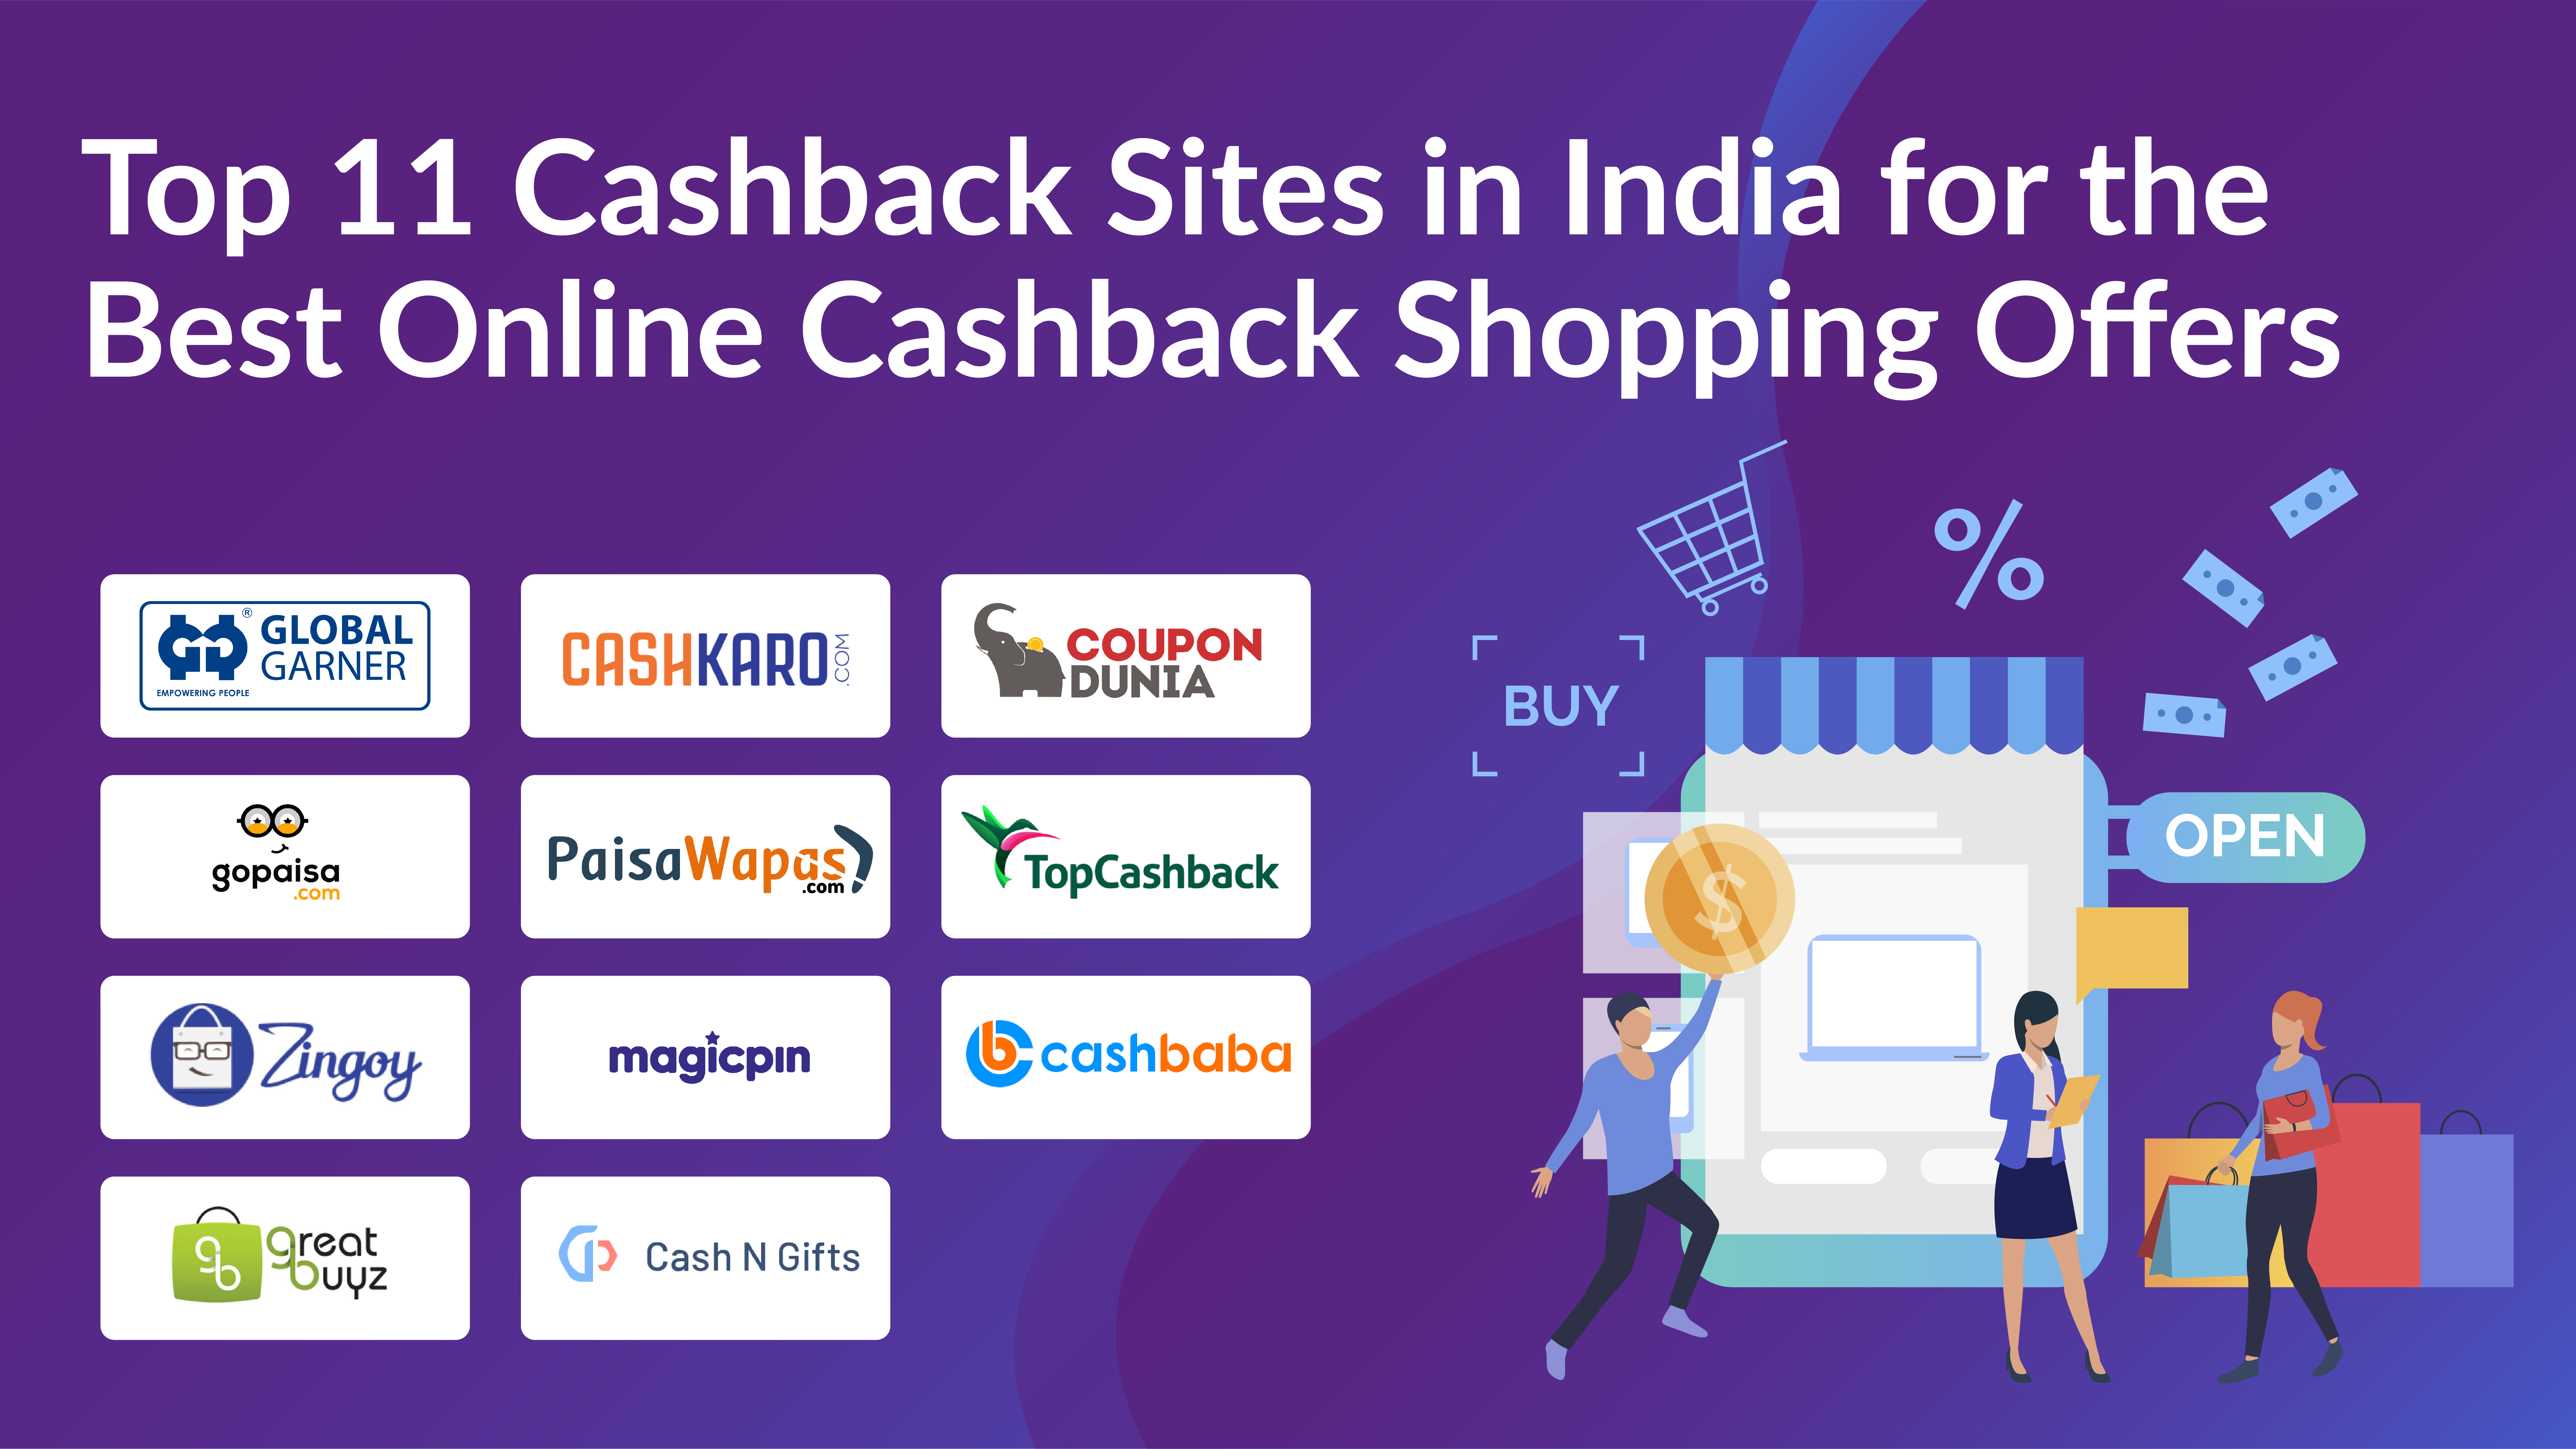 Top cashback sites in India